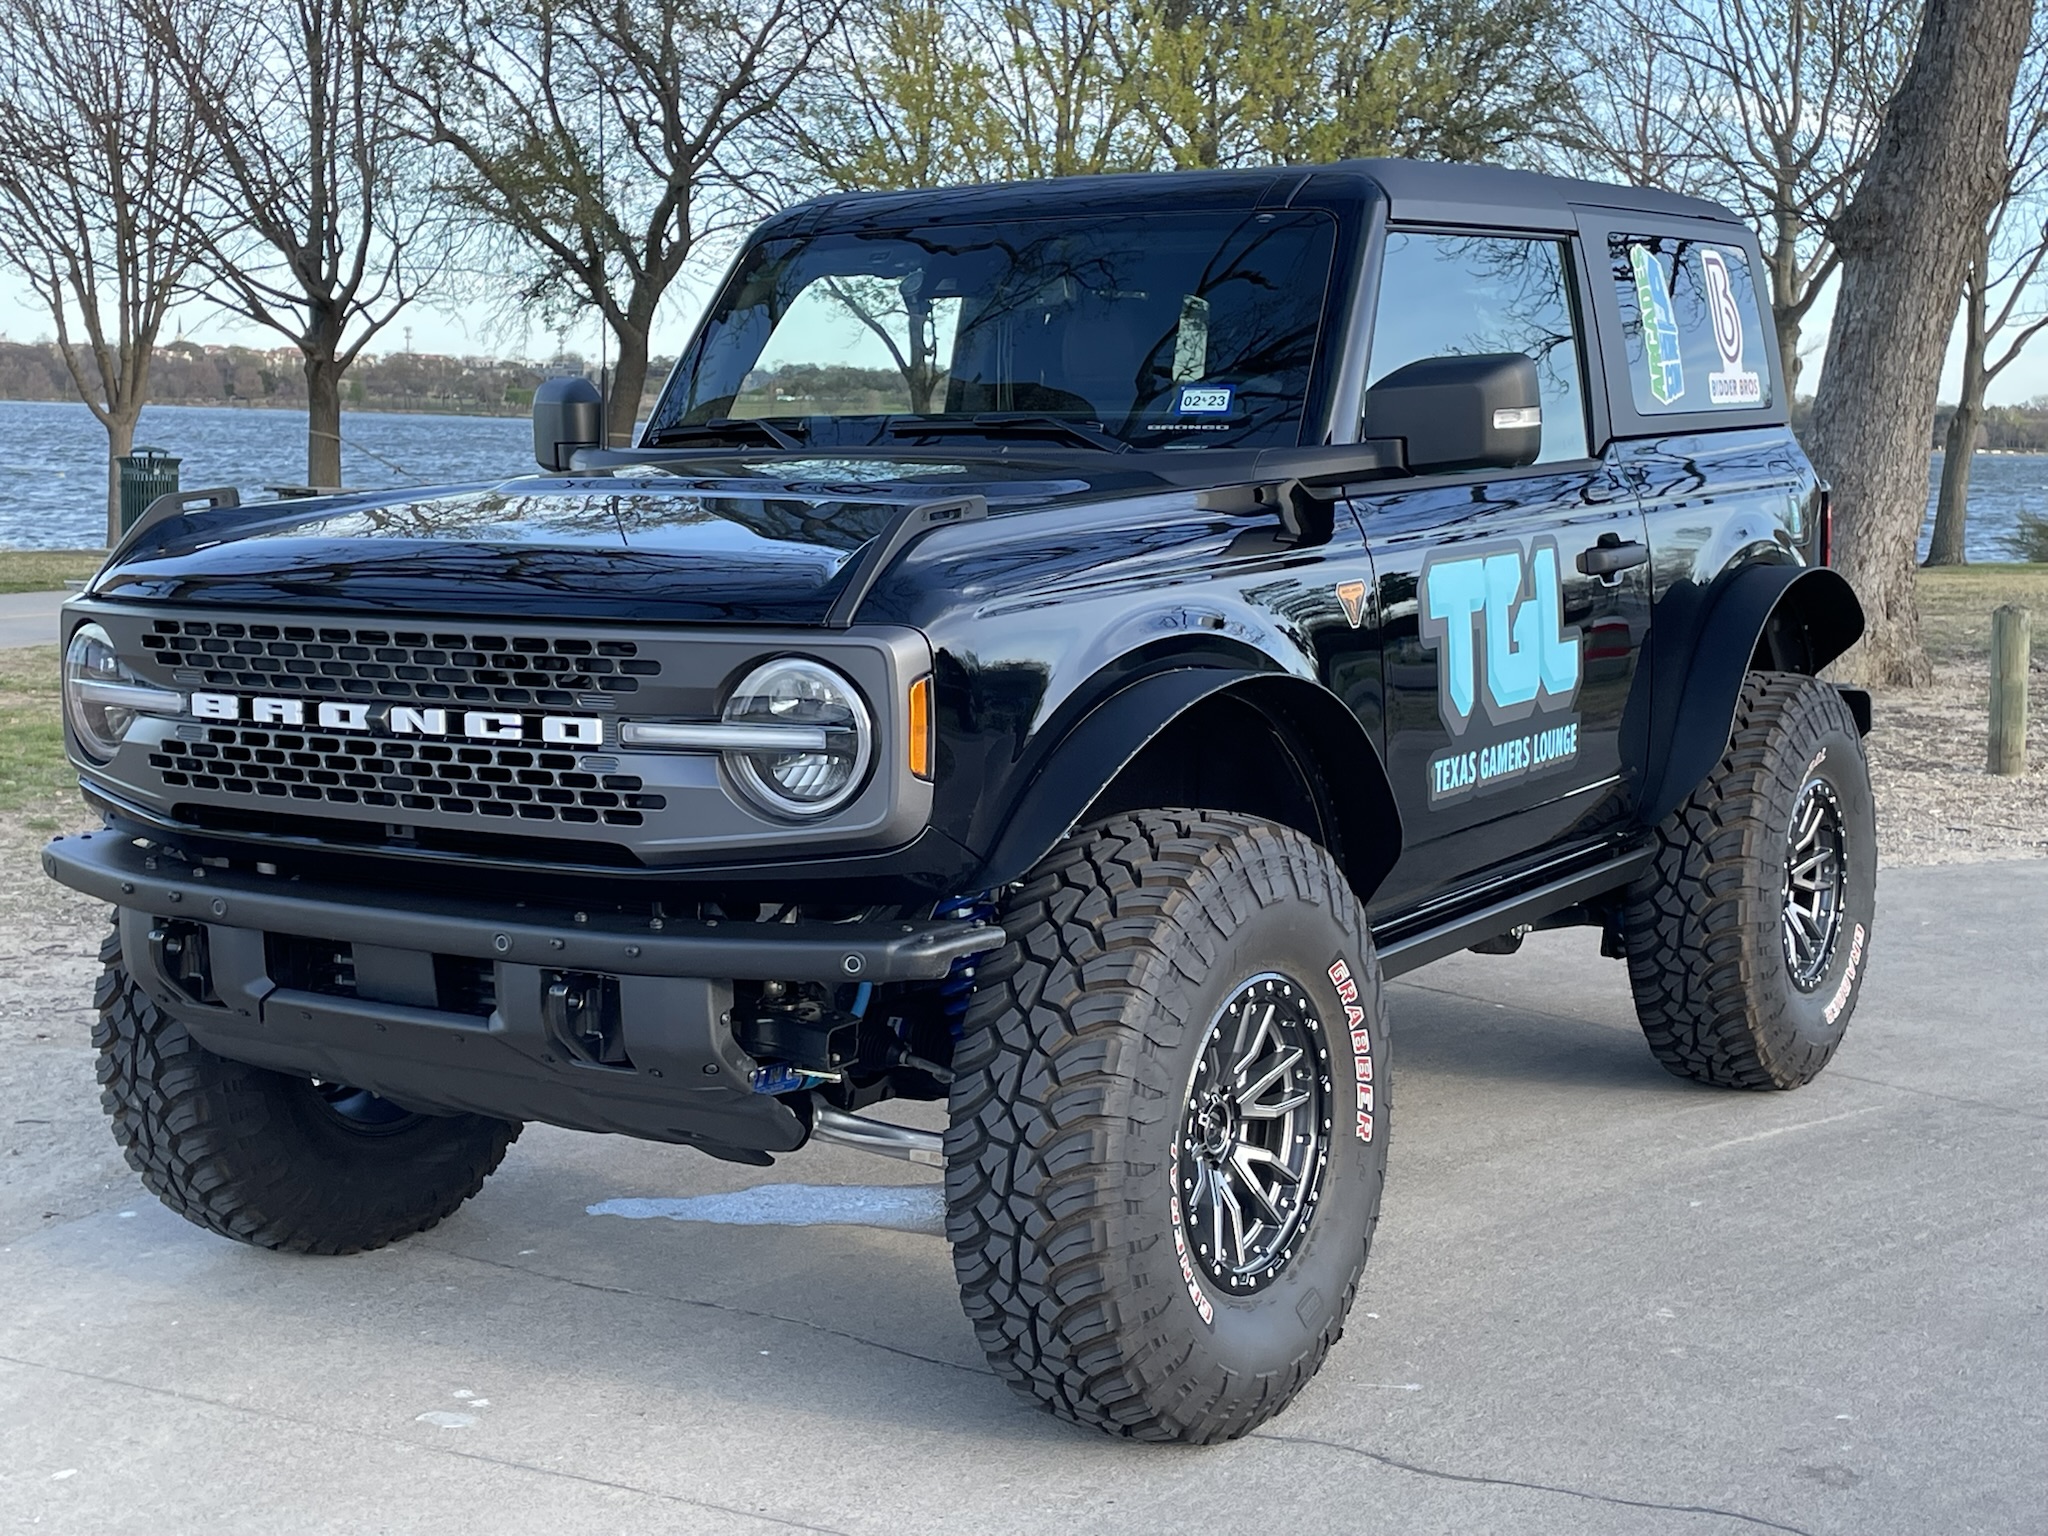 Ford Bronco Let’s see your favorite picture of your Bronco! lak